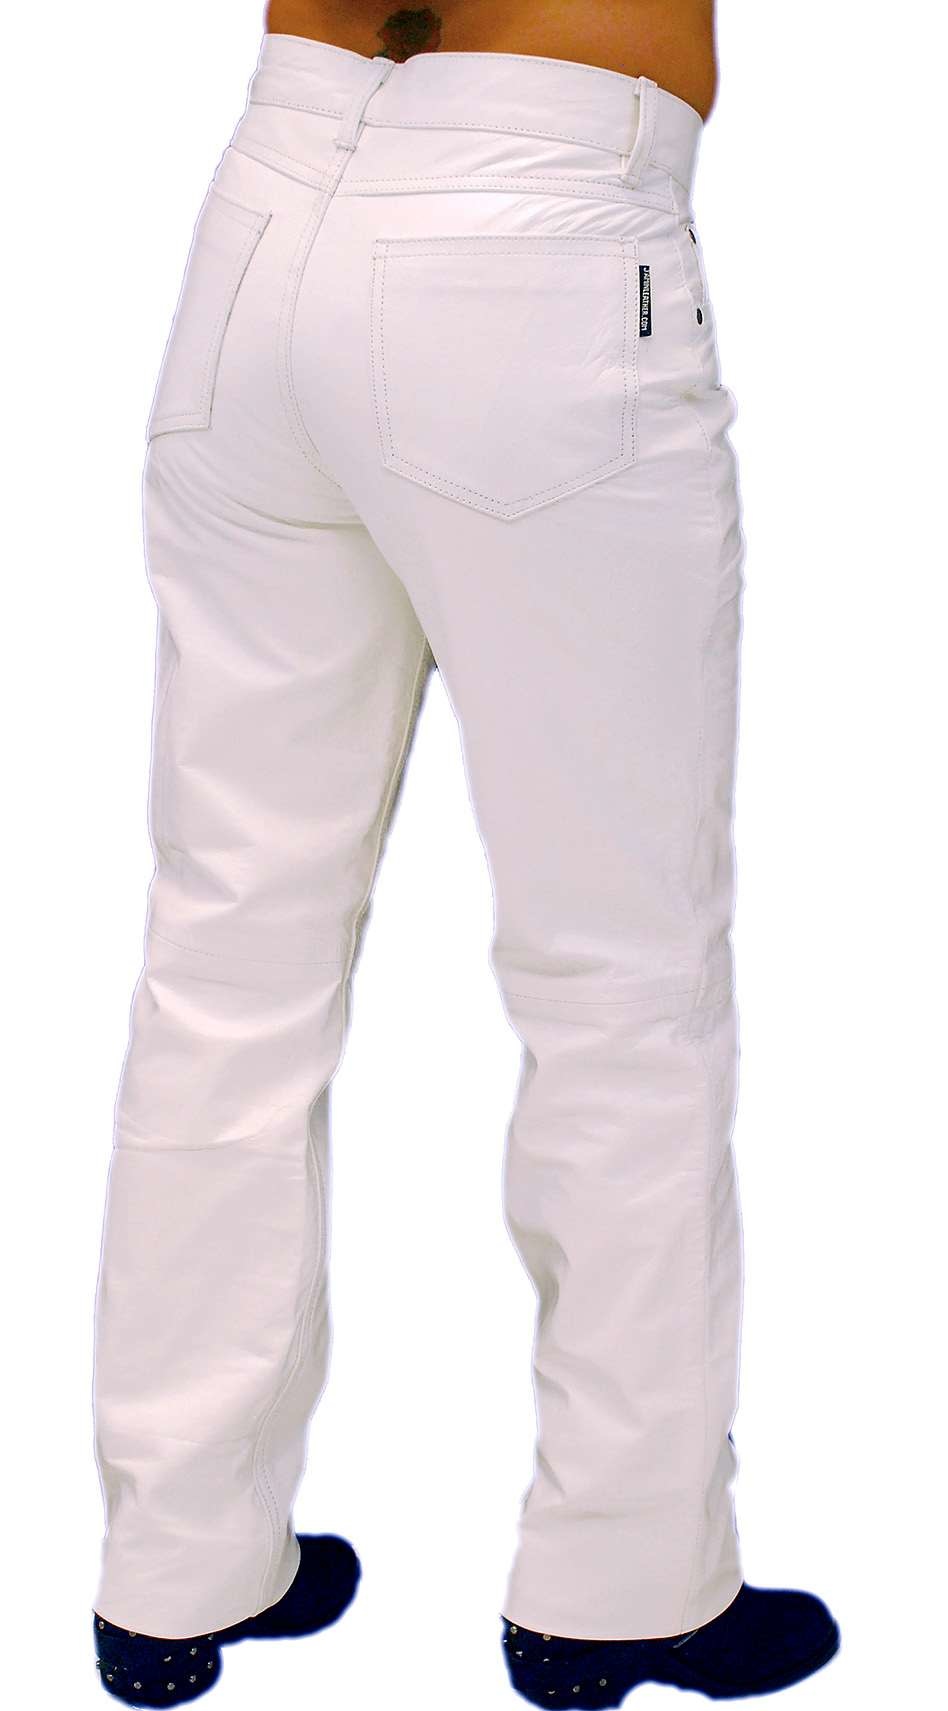 White Leather Pants for Women #LP710W - Jamin Leather®